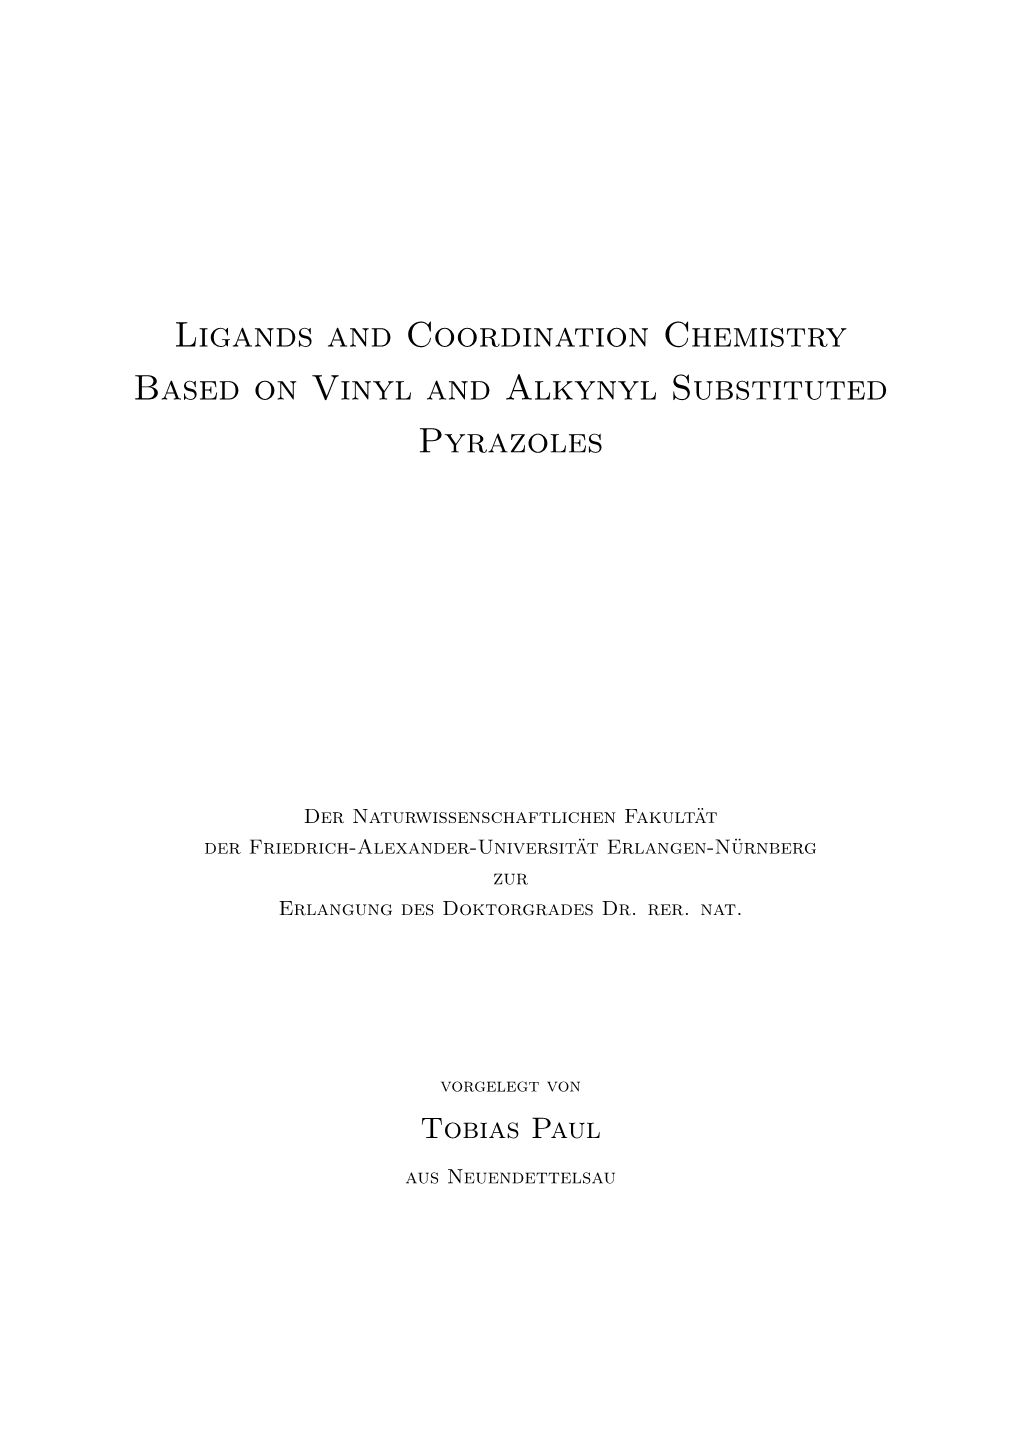 Ligands and Coordination Chemistry Based on Vinyl and Alkynyl Substituted Pyrazoles